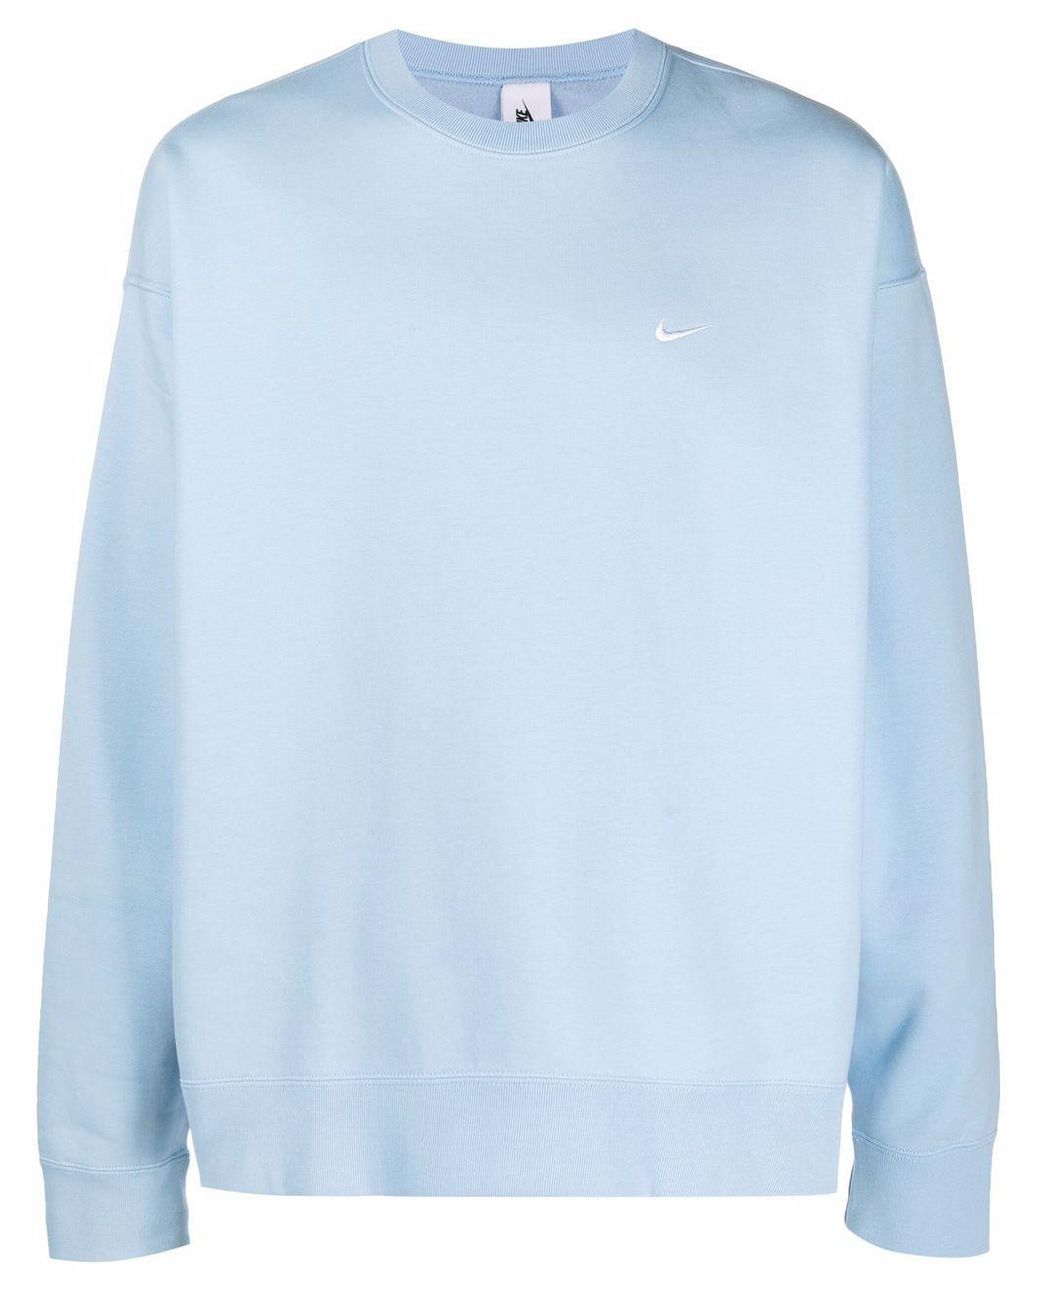 Nike Cotton Embroidered-swoosh Crewneck Jumper in Blue for Men - Lyst